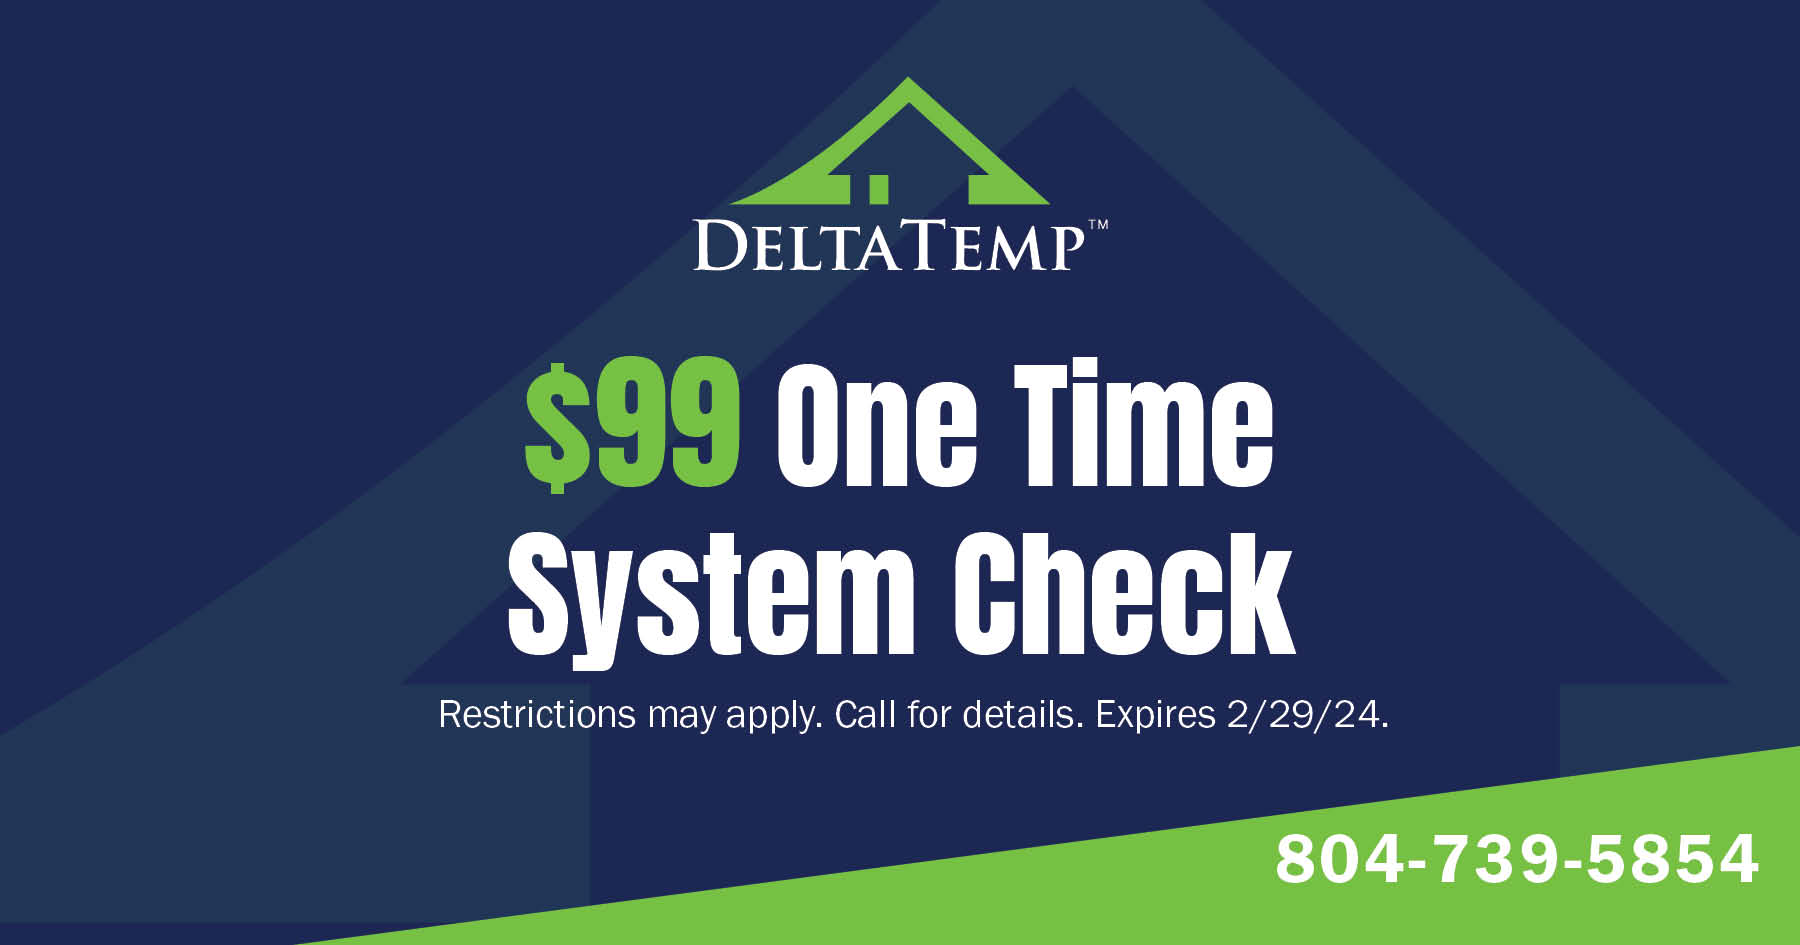  One time system check. Restrictions may apply. Call for details. Expires 2/29/2024.